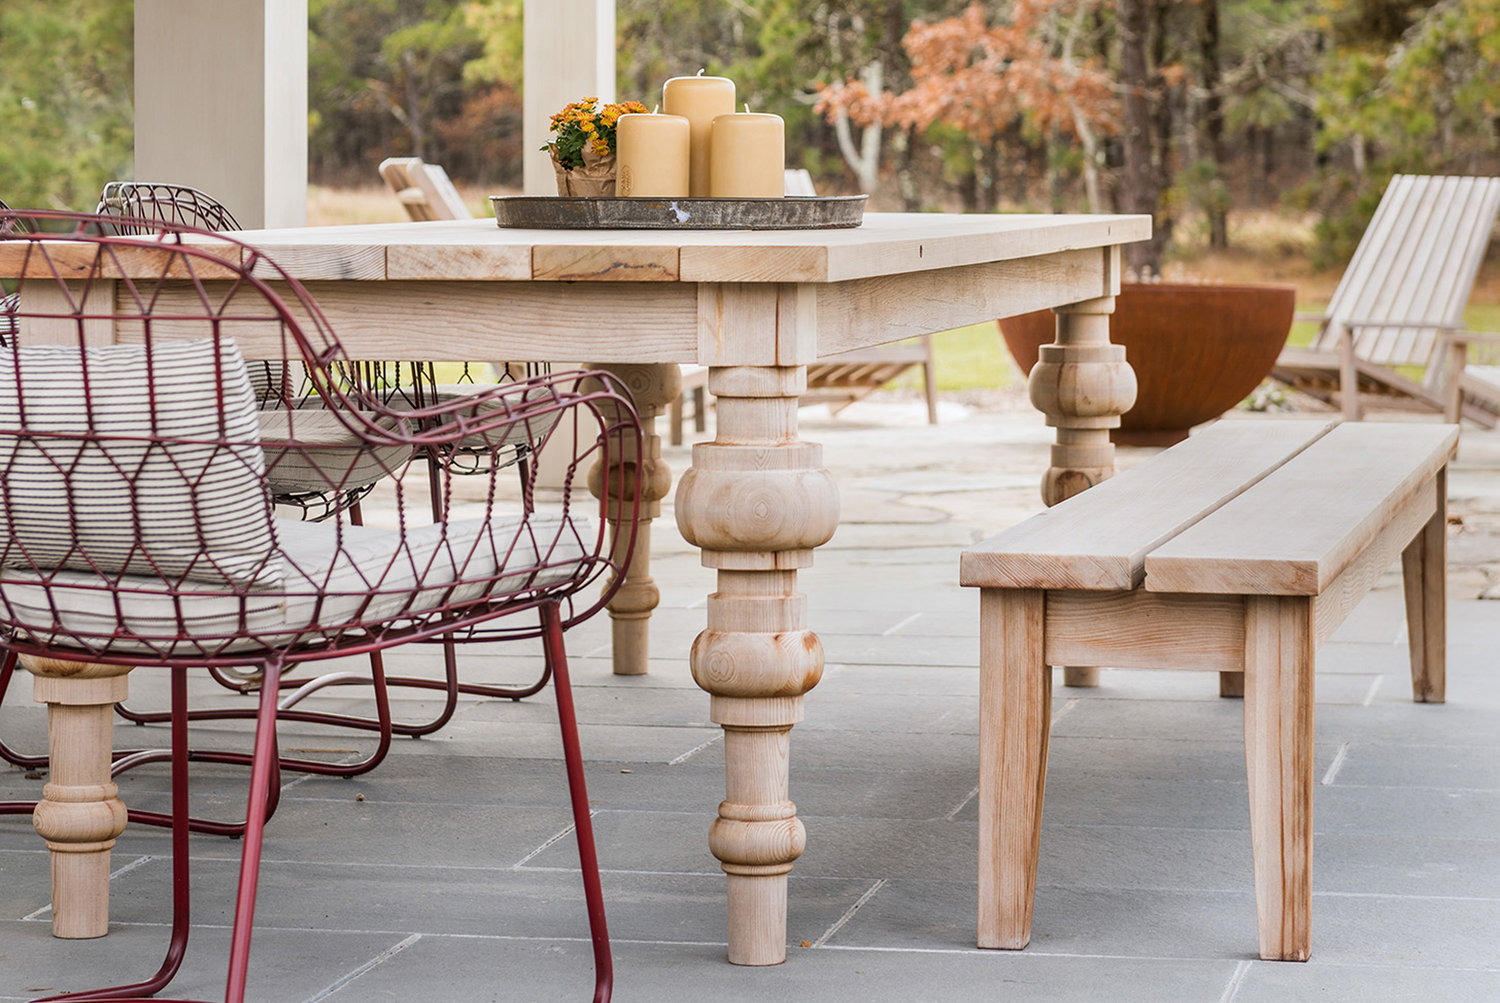 A collaboration with Hutker Architects, this patio table was inspired by an antique Parisian table and made with reclaimed late 1800s redwood from a New Hampshire navy yard